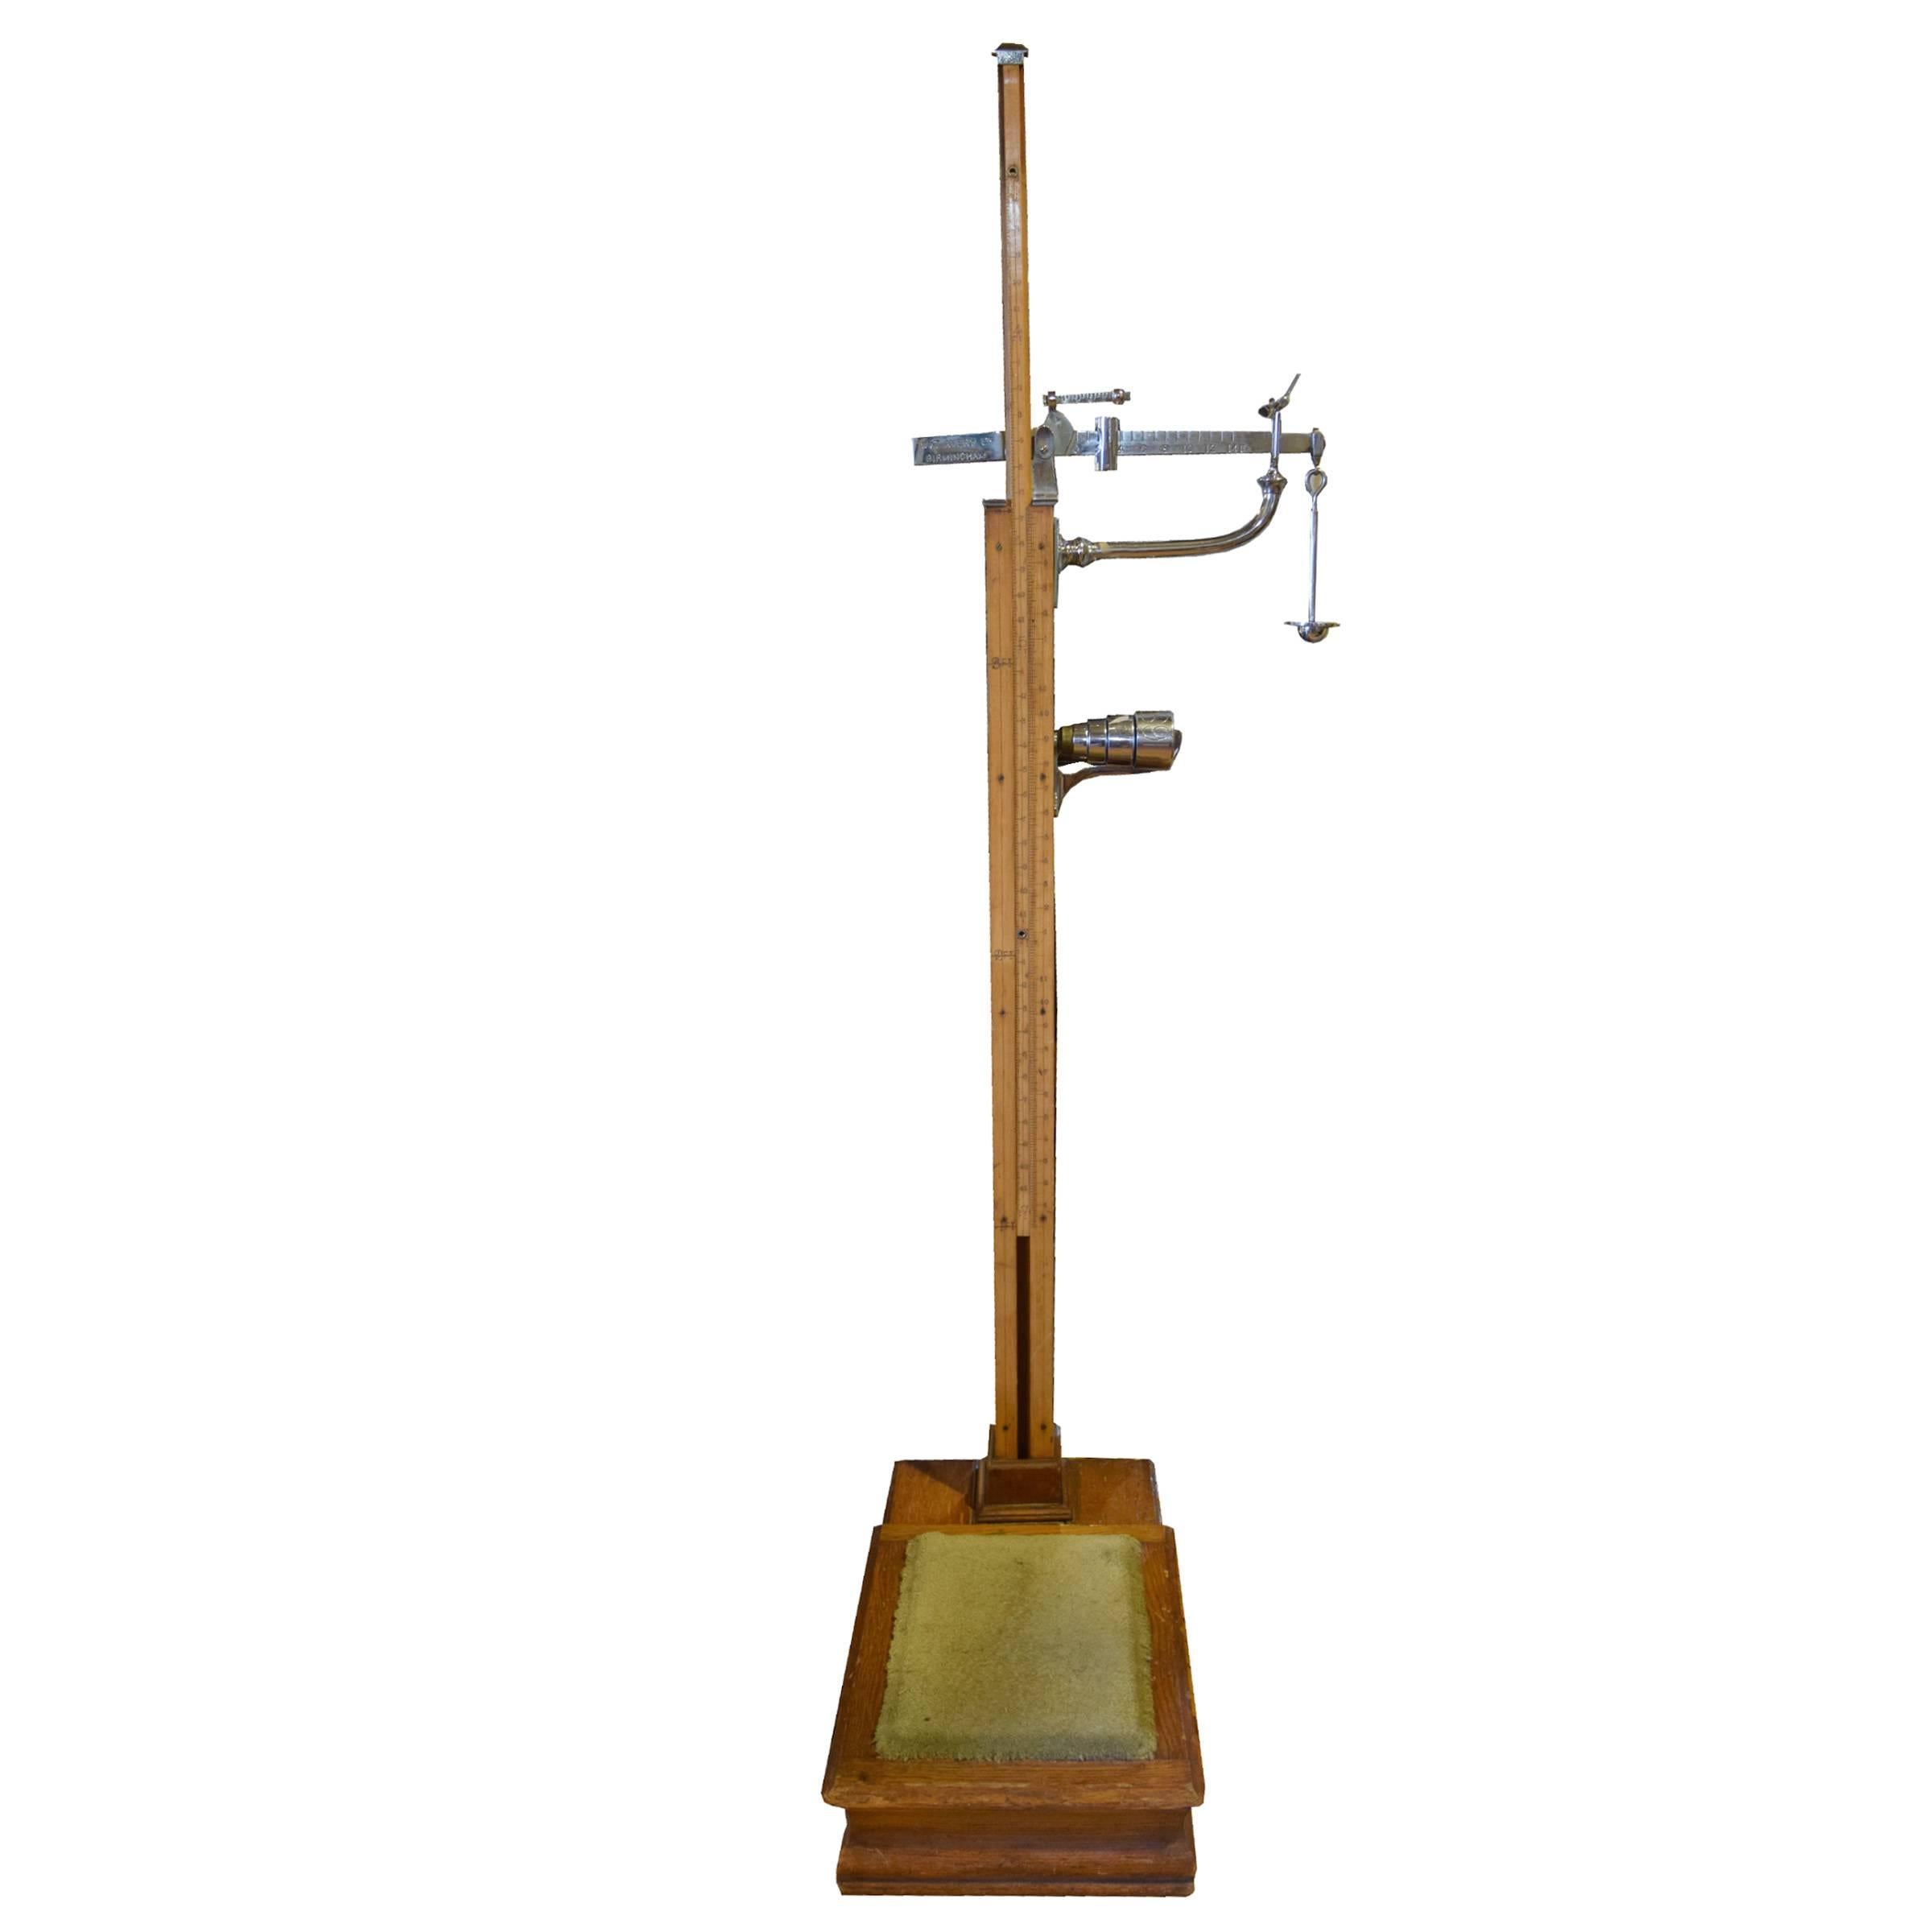 A fantastic oak and maple English doctor's scale and stadiograph by W&T Avery Ltd. of Birmingham with polished chrome scale and weights, early 20th century.